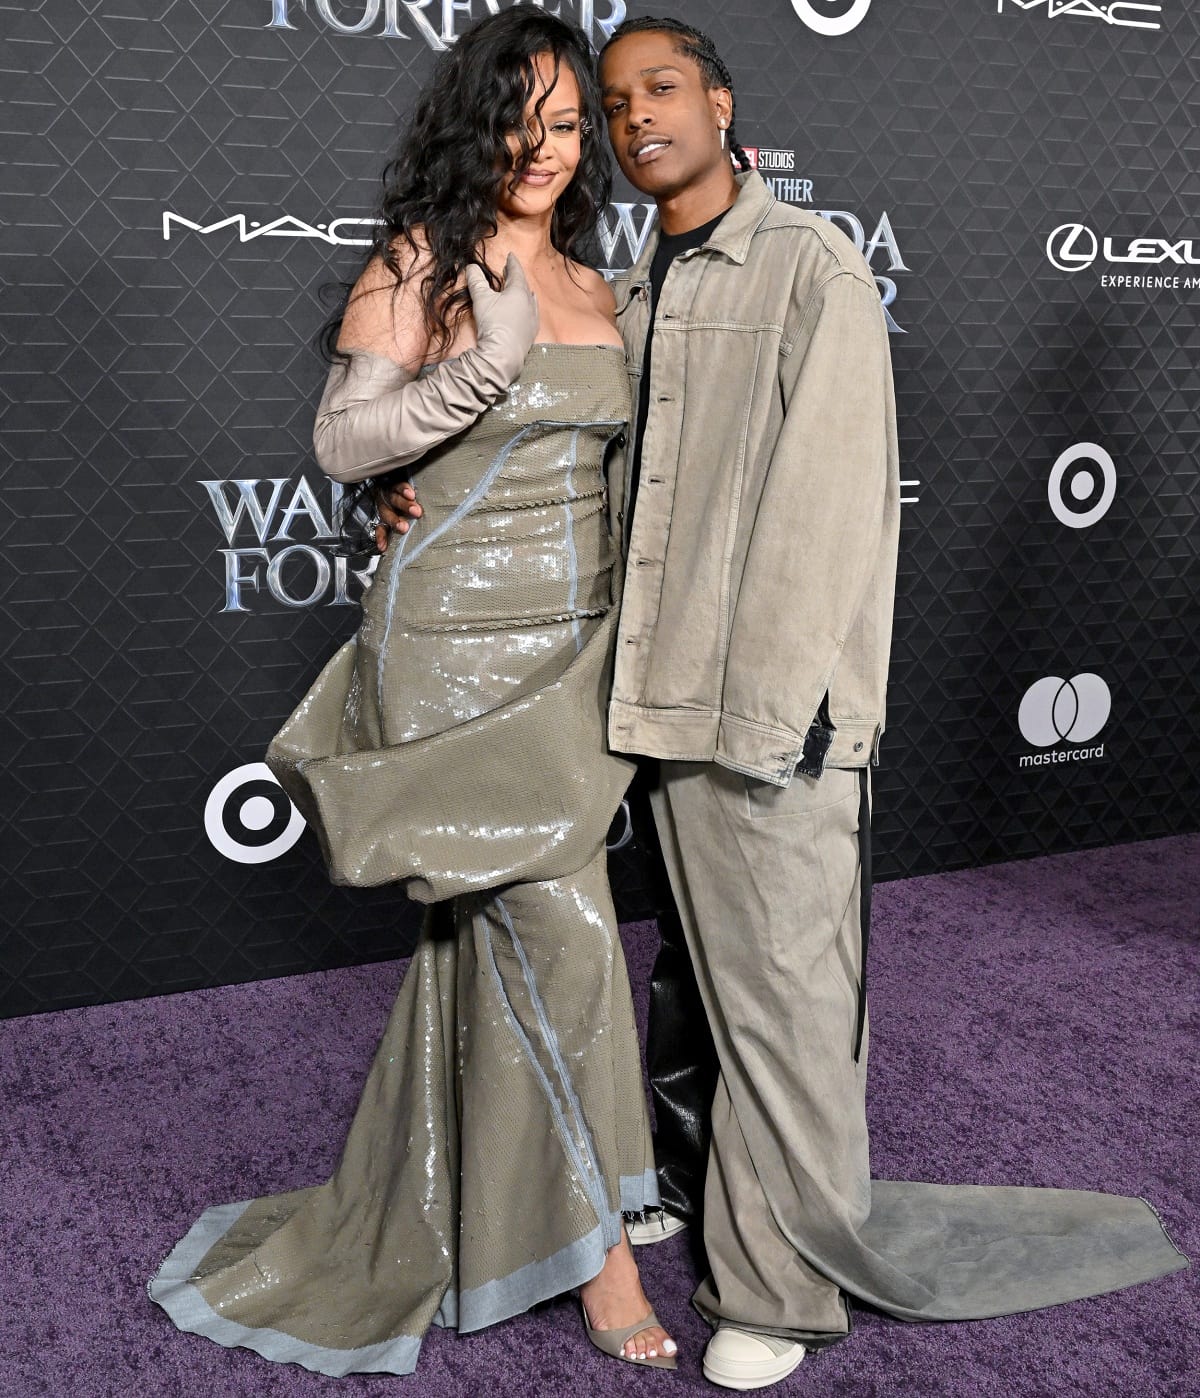 Rihanna and A$AP Rocky in color-coordinating outfits at the Black Panter: Wakanda Forever Los Angeles premiere